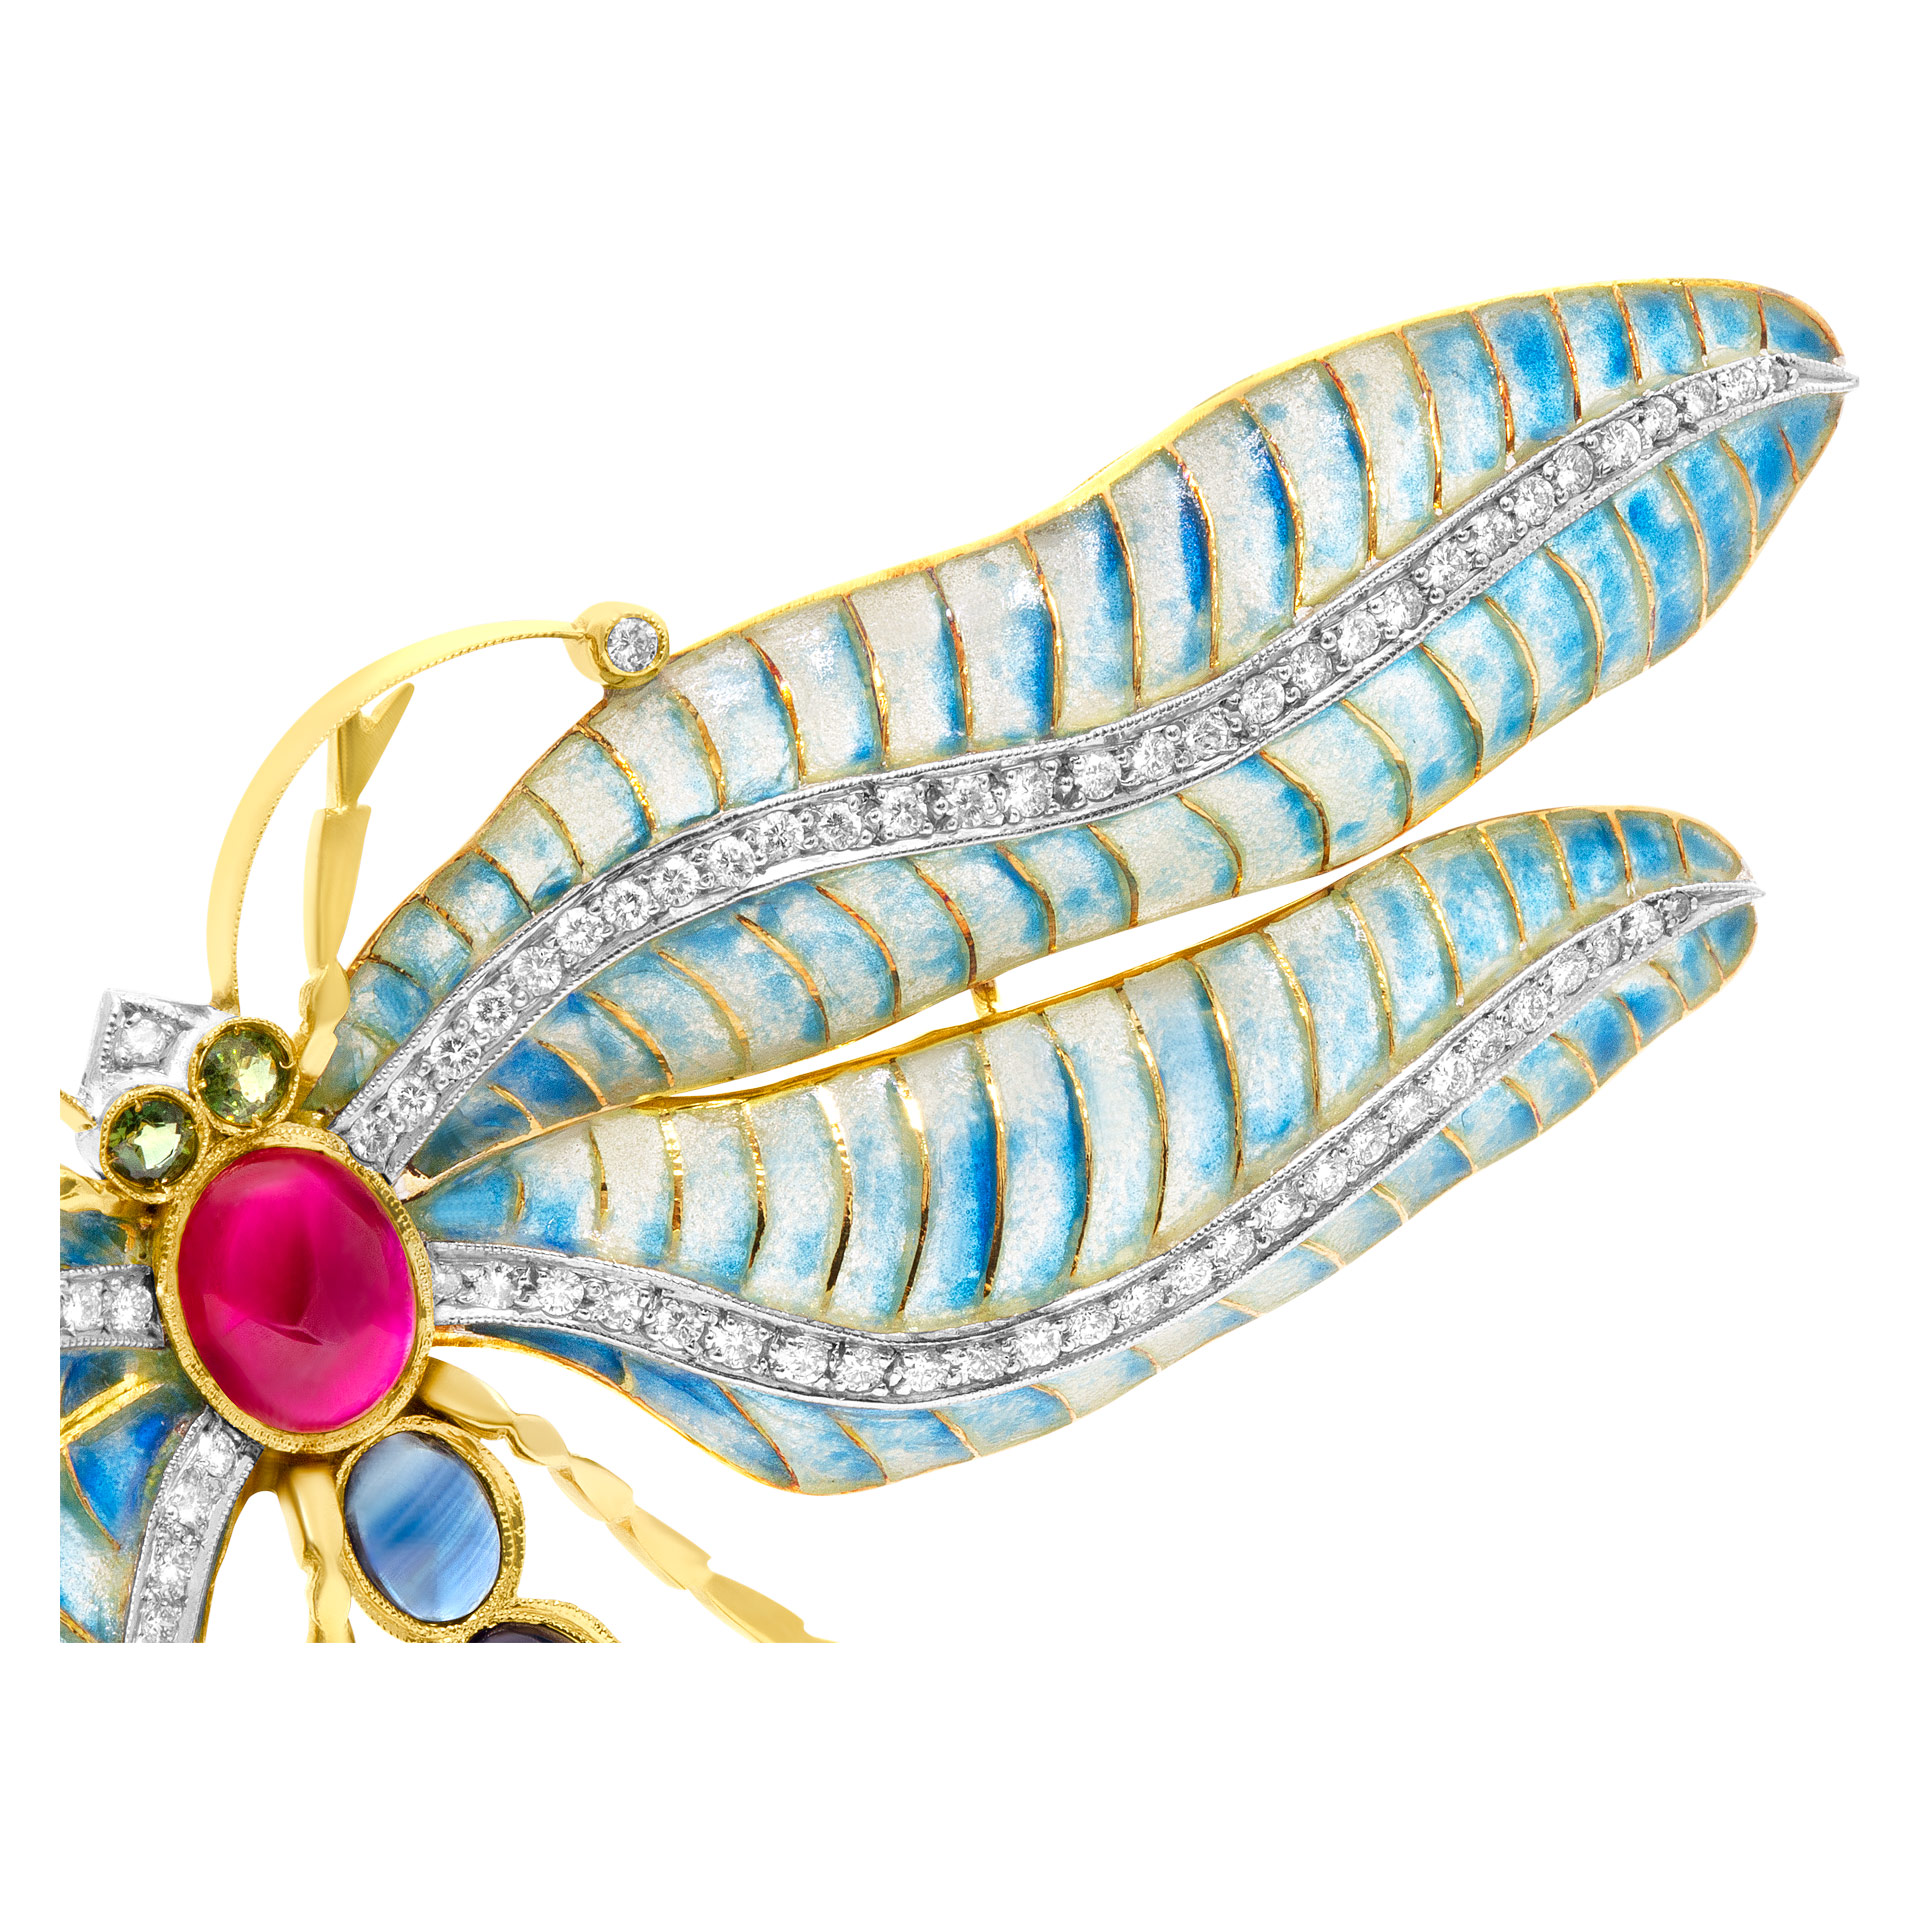 Dragonfly in 18k with 2.25 cts in diamonds, 1.50 ct in cabochon ruby, enamel and sapphires image 3